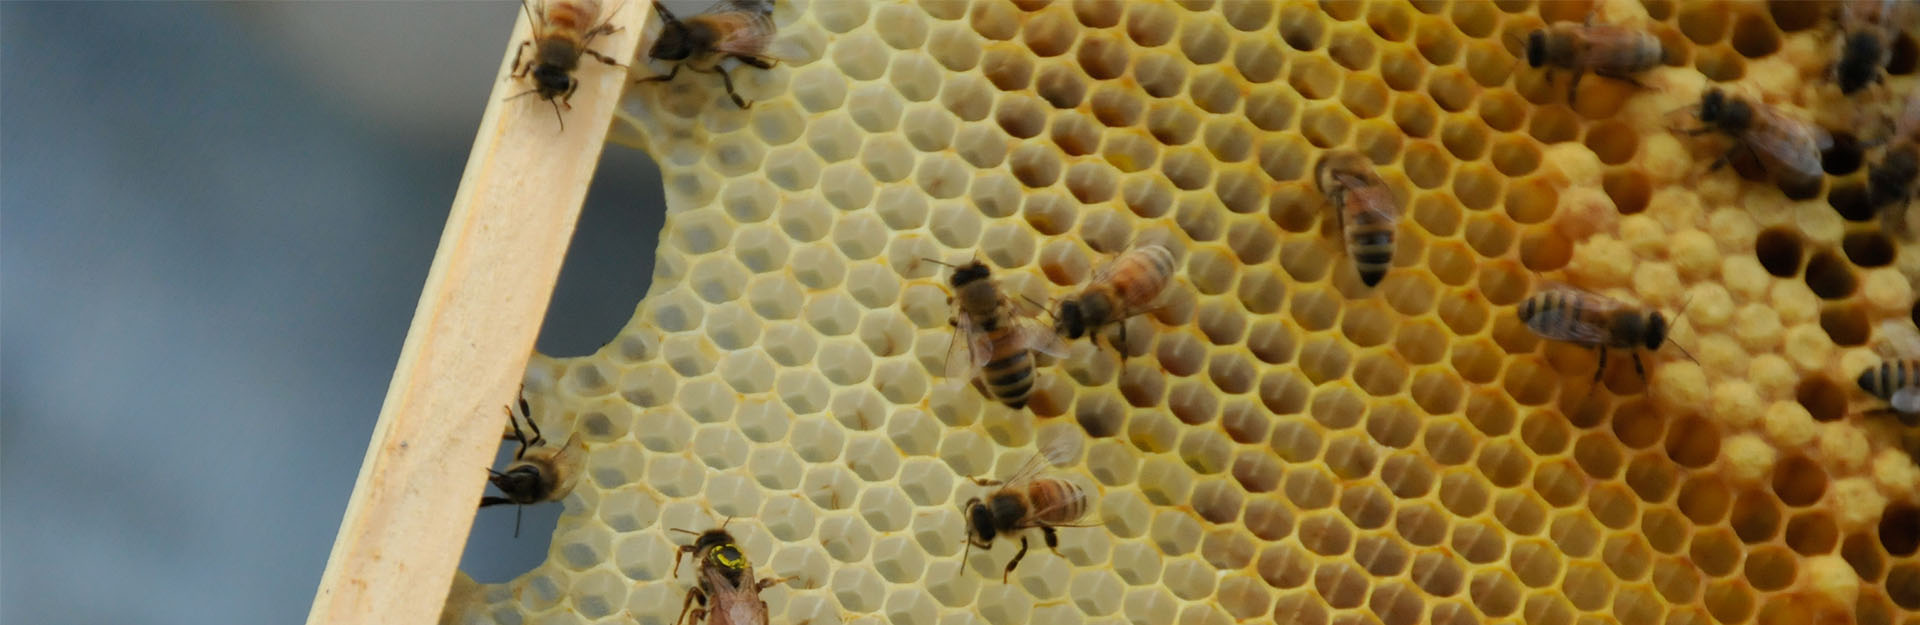 honey frame with bees